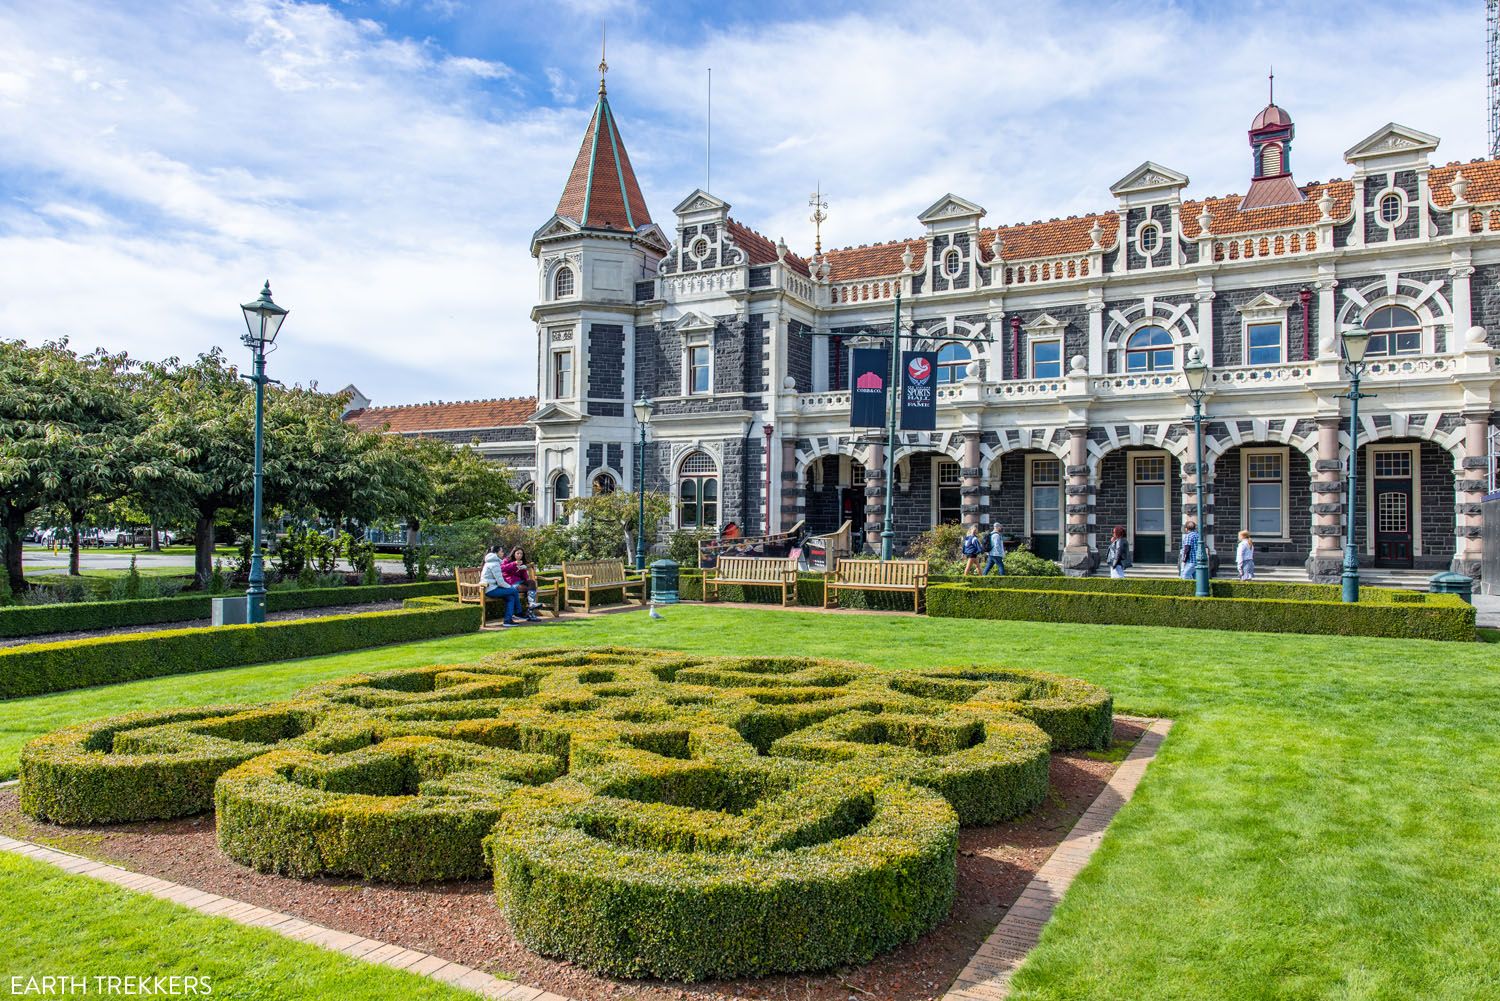 Dunedin New Zealand | Best Things to Do on the South Island